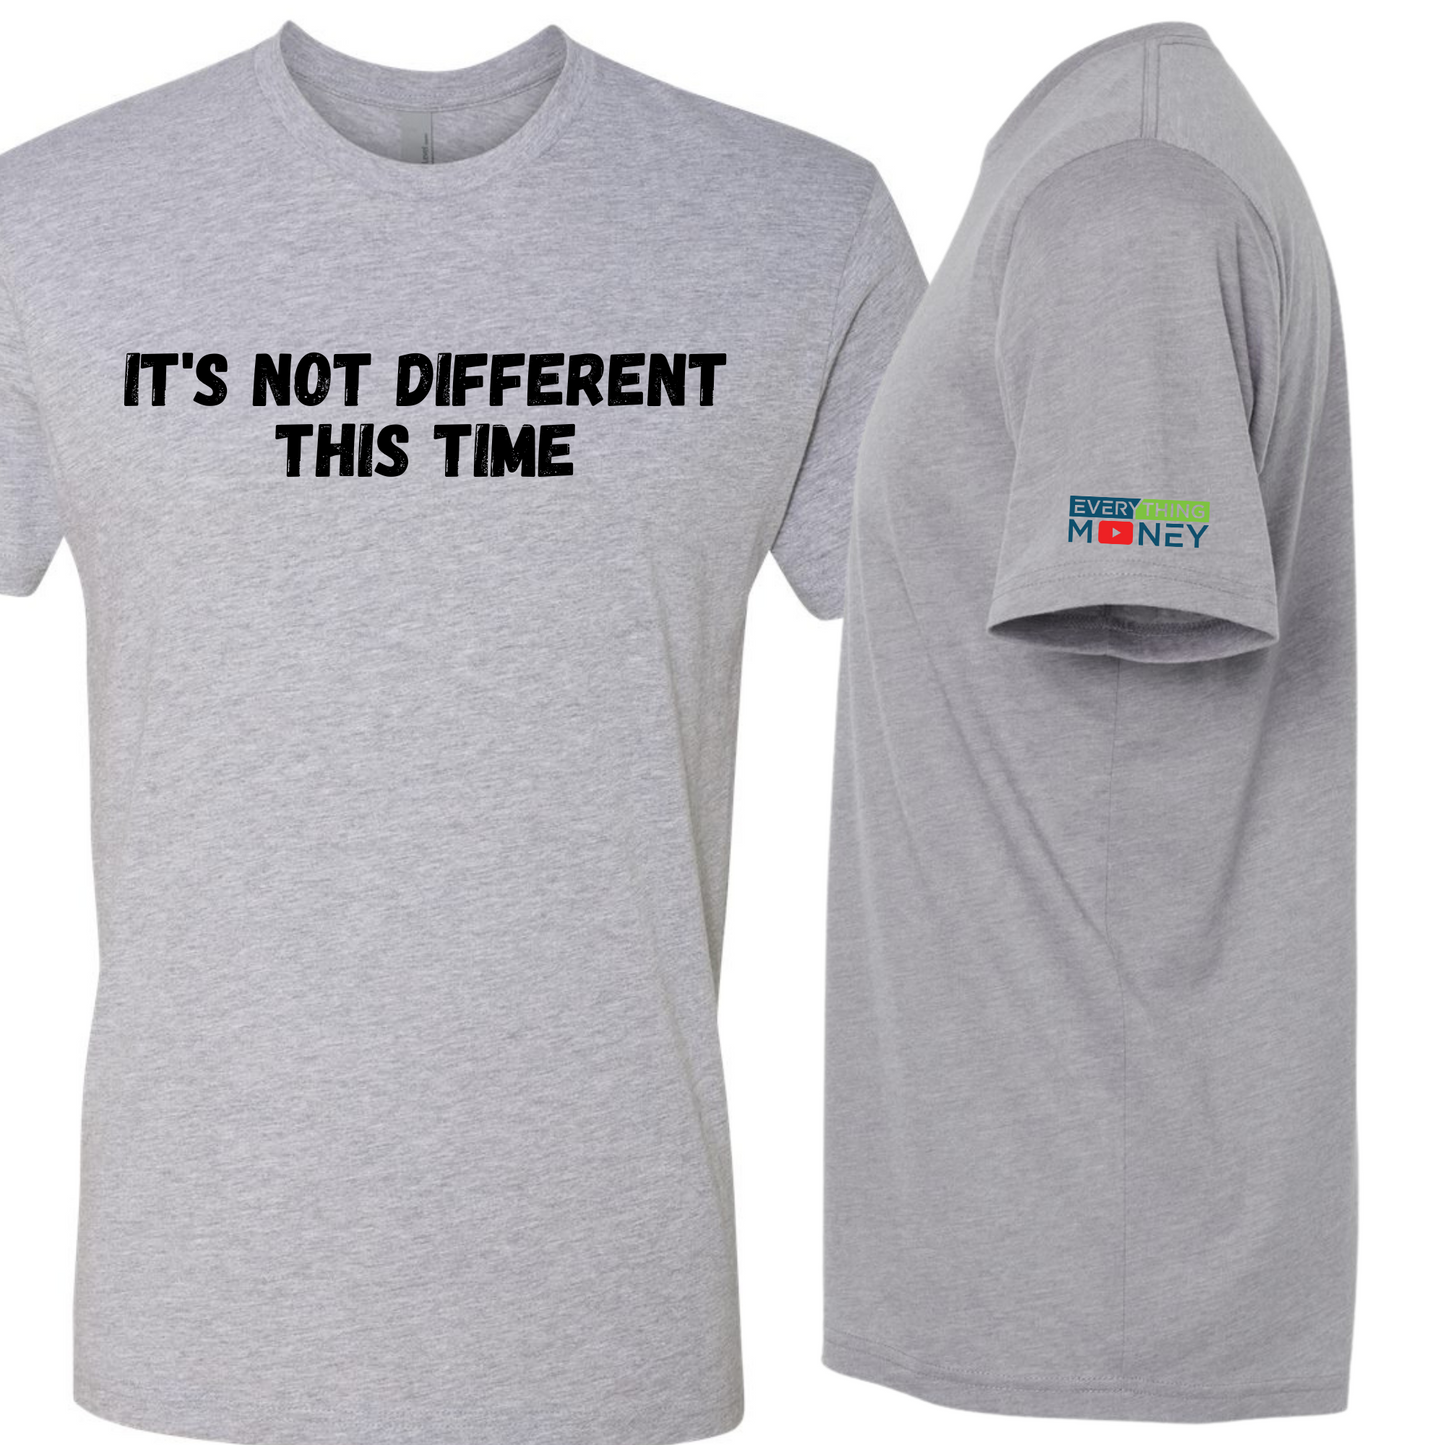 Everything Money "It's Not Different This Time" Fitted Crew T-Shirt by Next Level